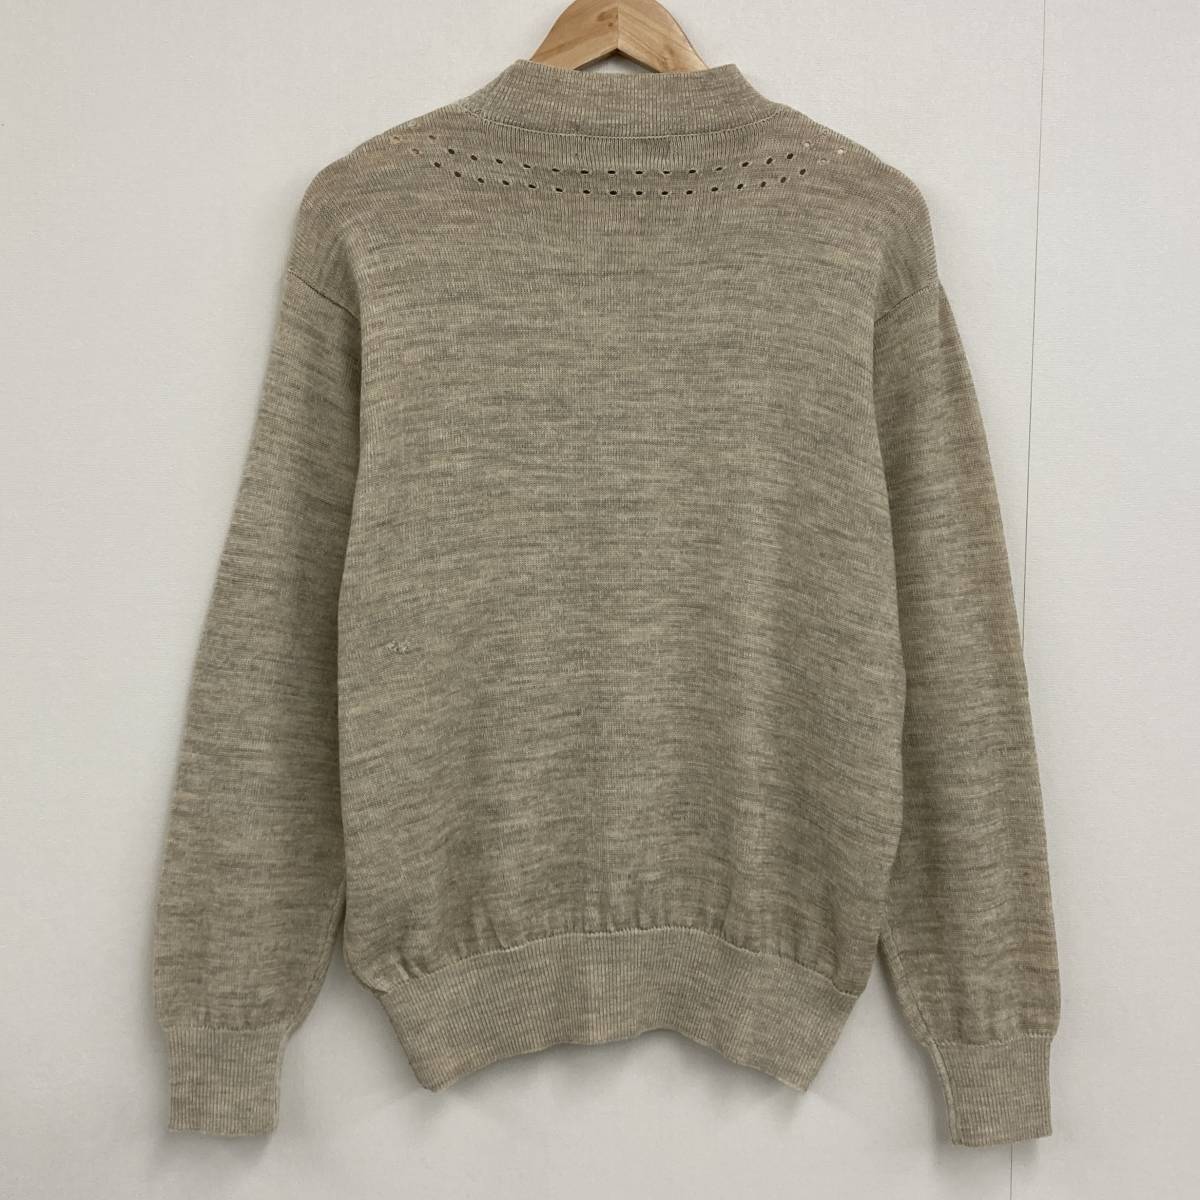 AD1989 Comme des Garcons Homme pryus punching high‐necked knitted sweater raw .HOMME PLUS cut and sewn 80s VINTAGE archive 3100267